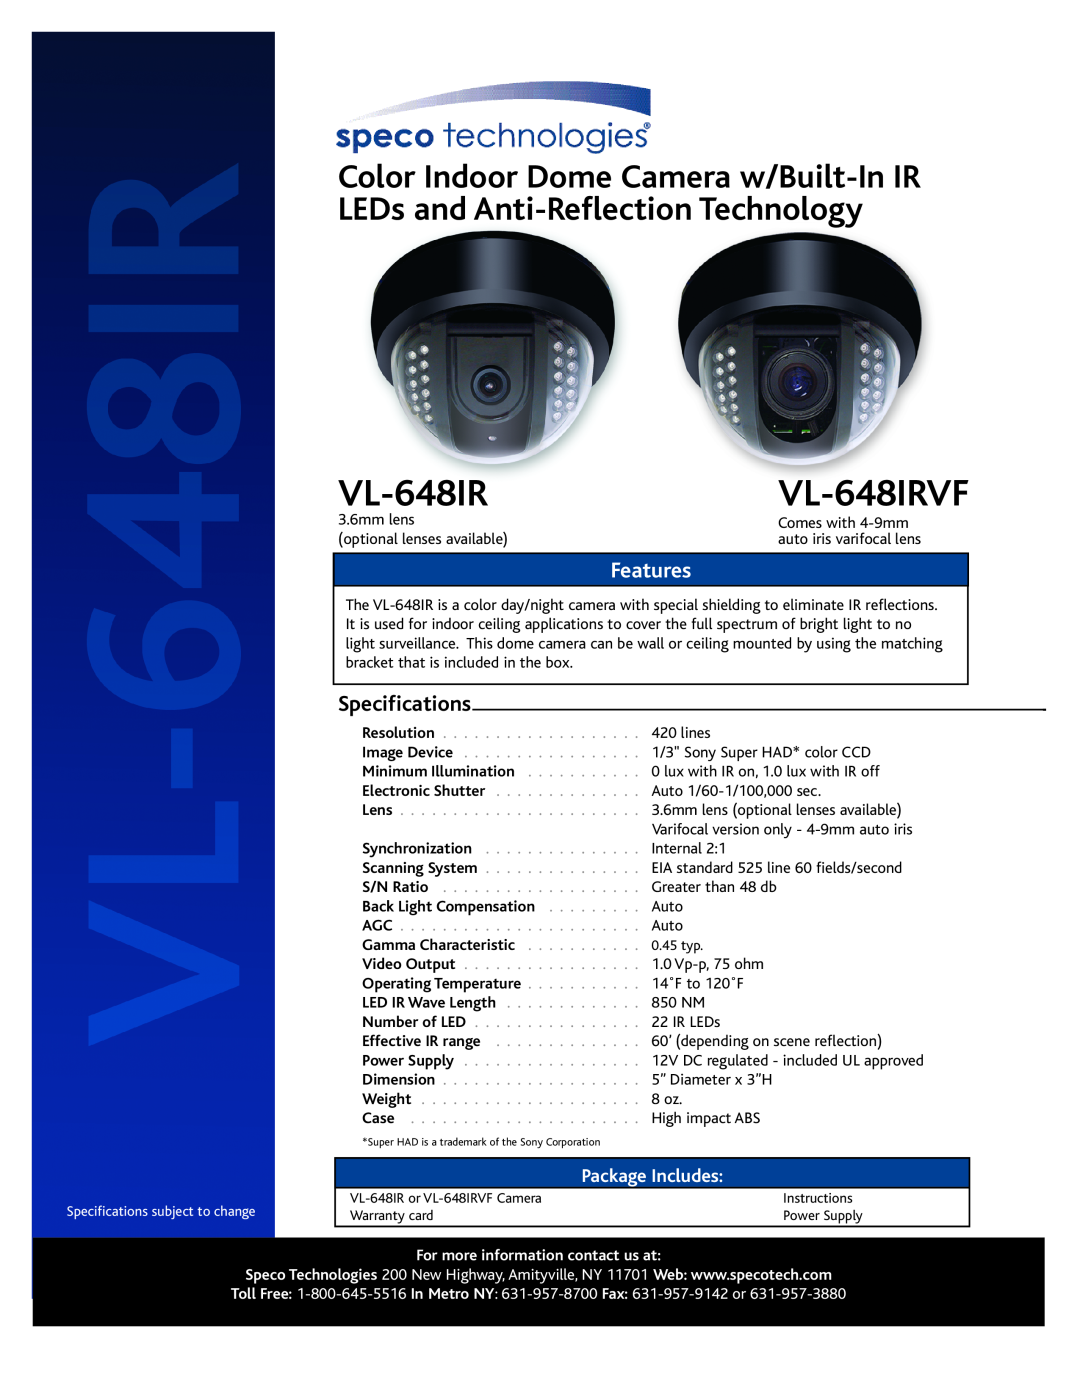 Speco Technologies VL-648IRVF specifications Features, Specifications, Package Includes, Resolution Image Device 